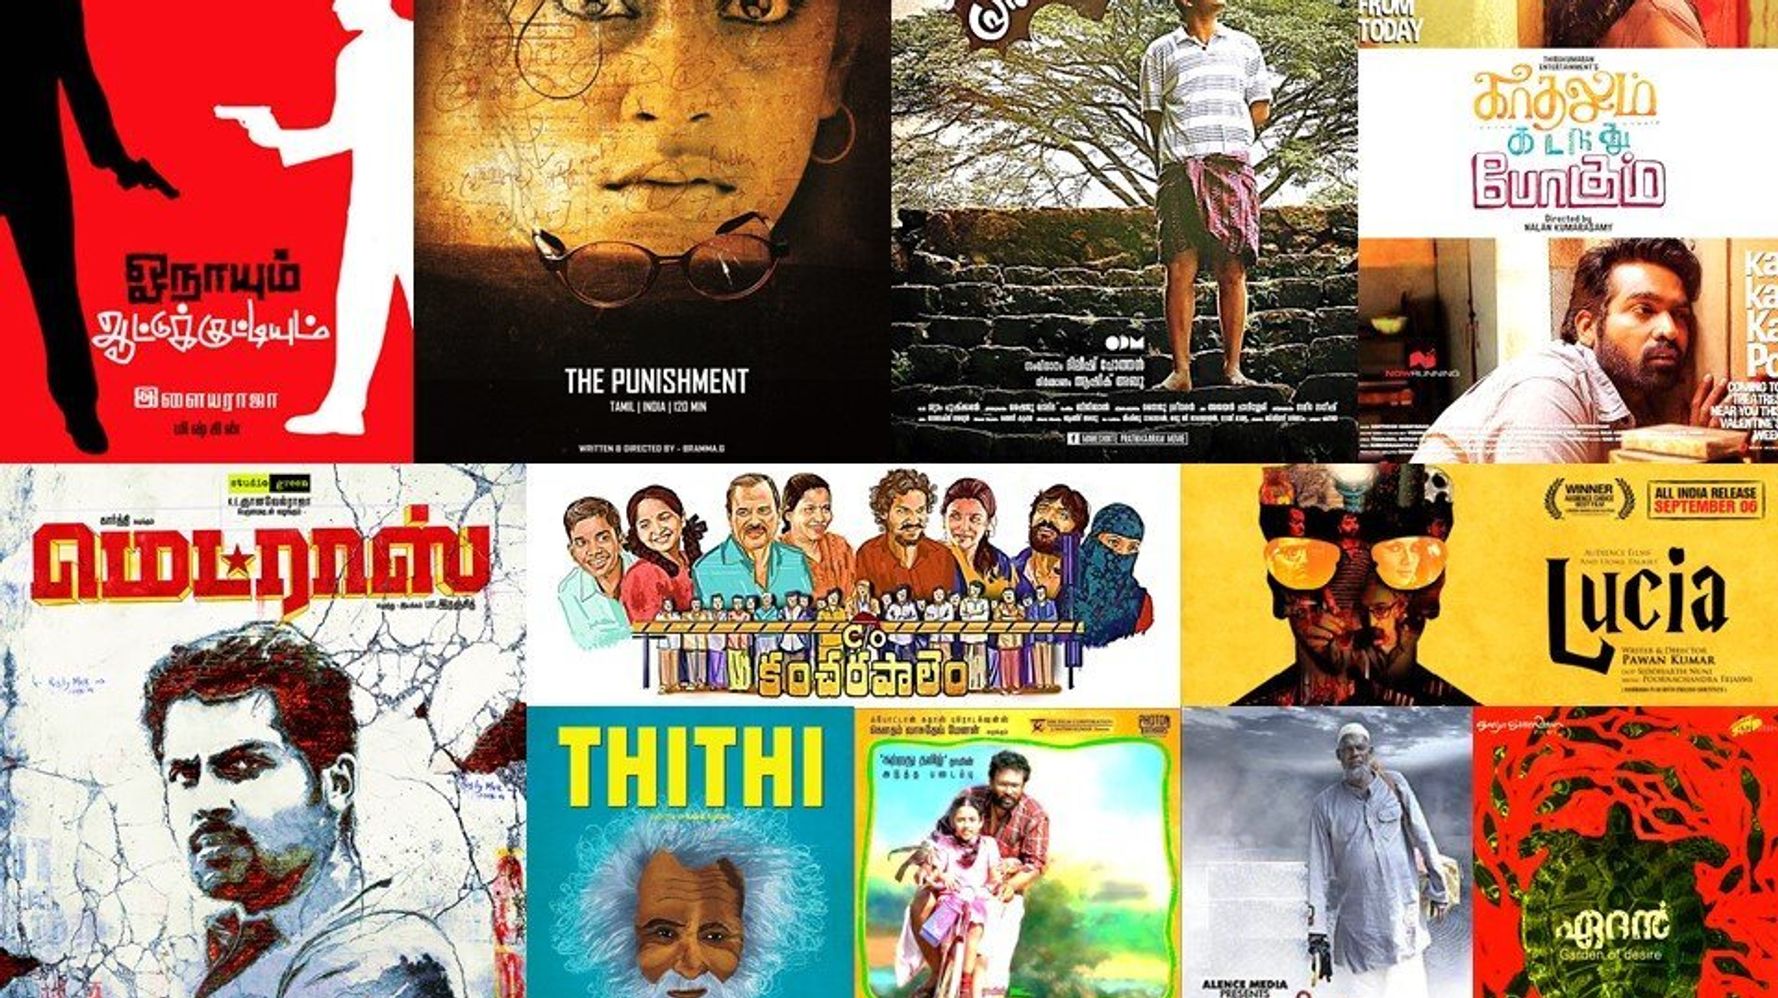 The 11 Most Remarkable Movies Of The Decade From South India